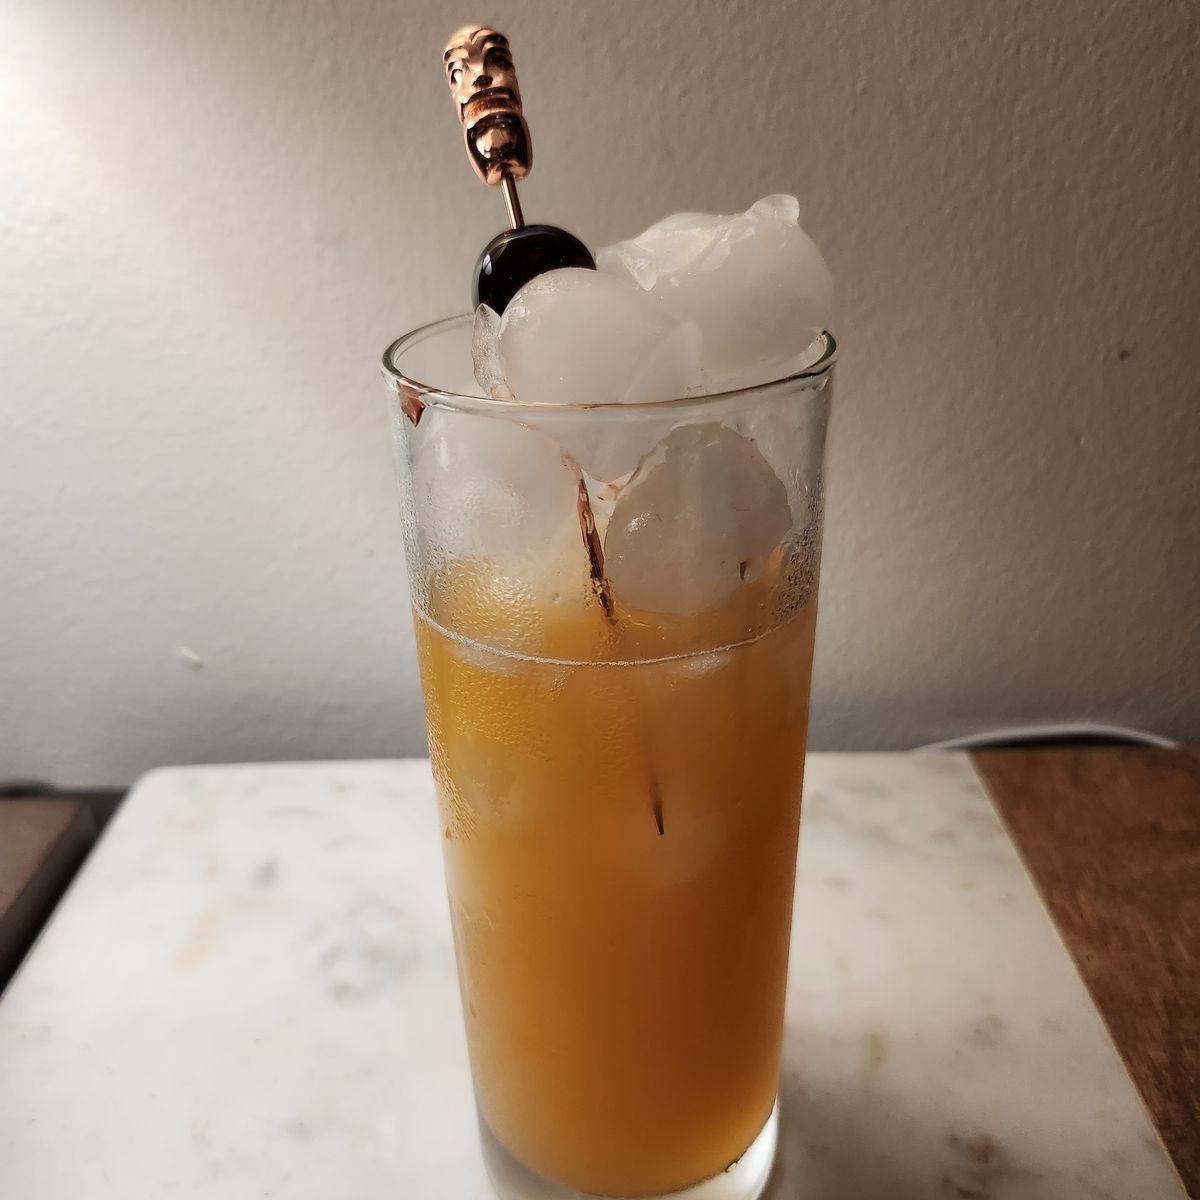 Hello friends! I'm back at it again with another kitchen sink cocktail, this time a Tiki-adjacent rum drink called Rockaway Beach! With a triple-split base of light and dark rum and a blanco tequila, this cocktail includes three fruit juices to round out the drink and add a little vitamins and nutrients. I would gladly fight off scurvy with this drink! It is light and tropical, and definitely has me dreaming of warmer weather and sunny days! Cheers!